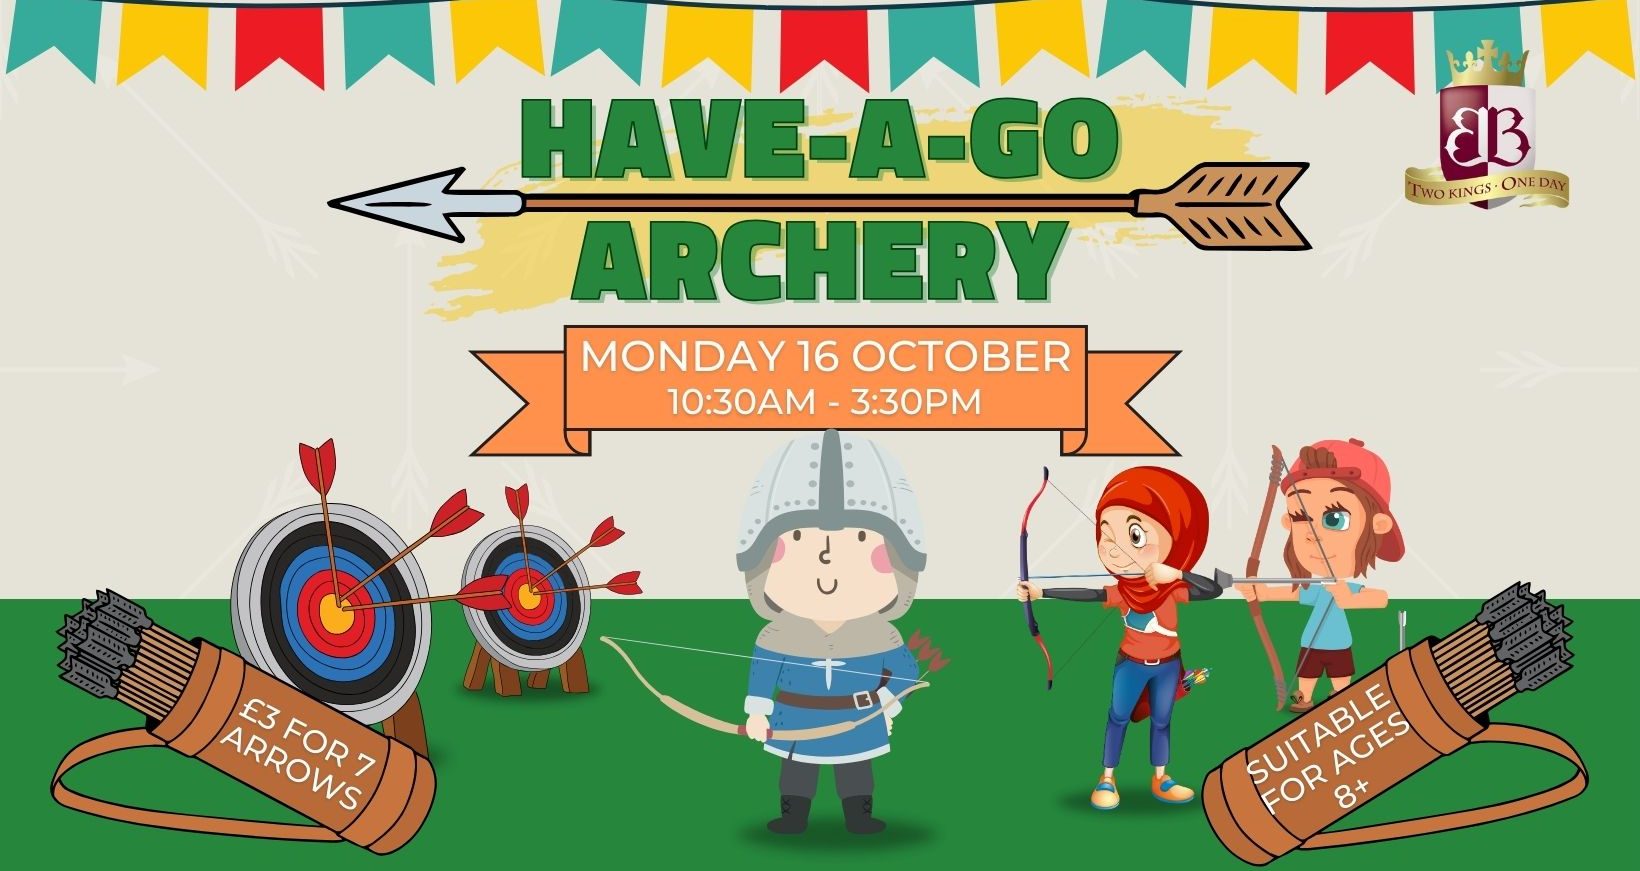 Have-a-go Archery